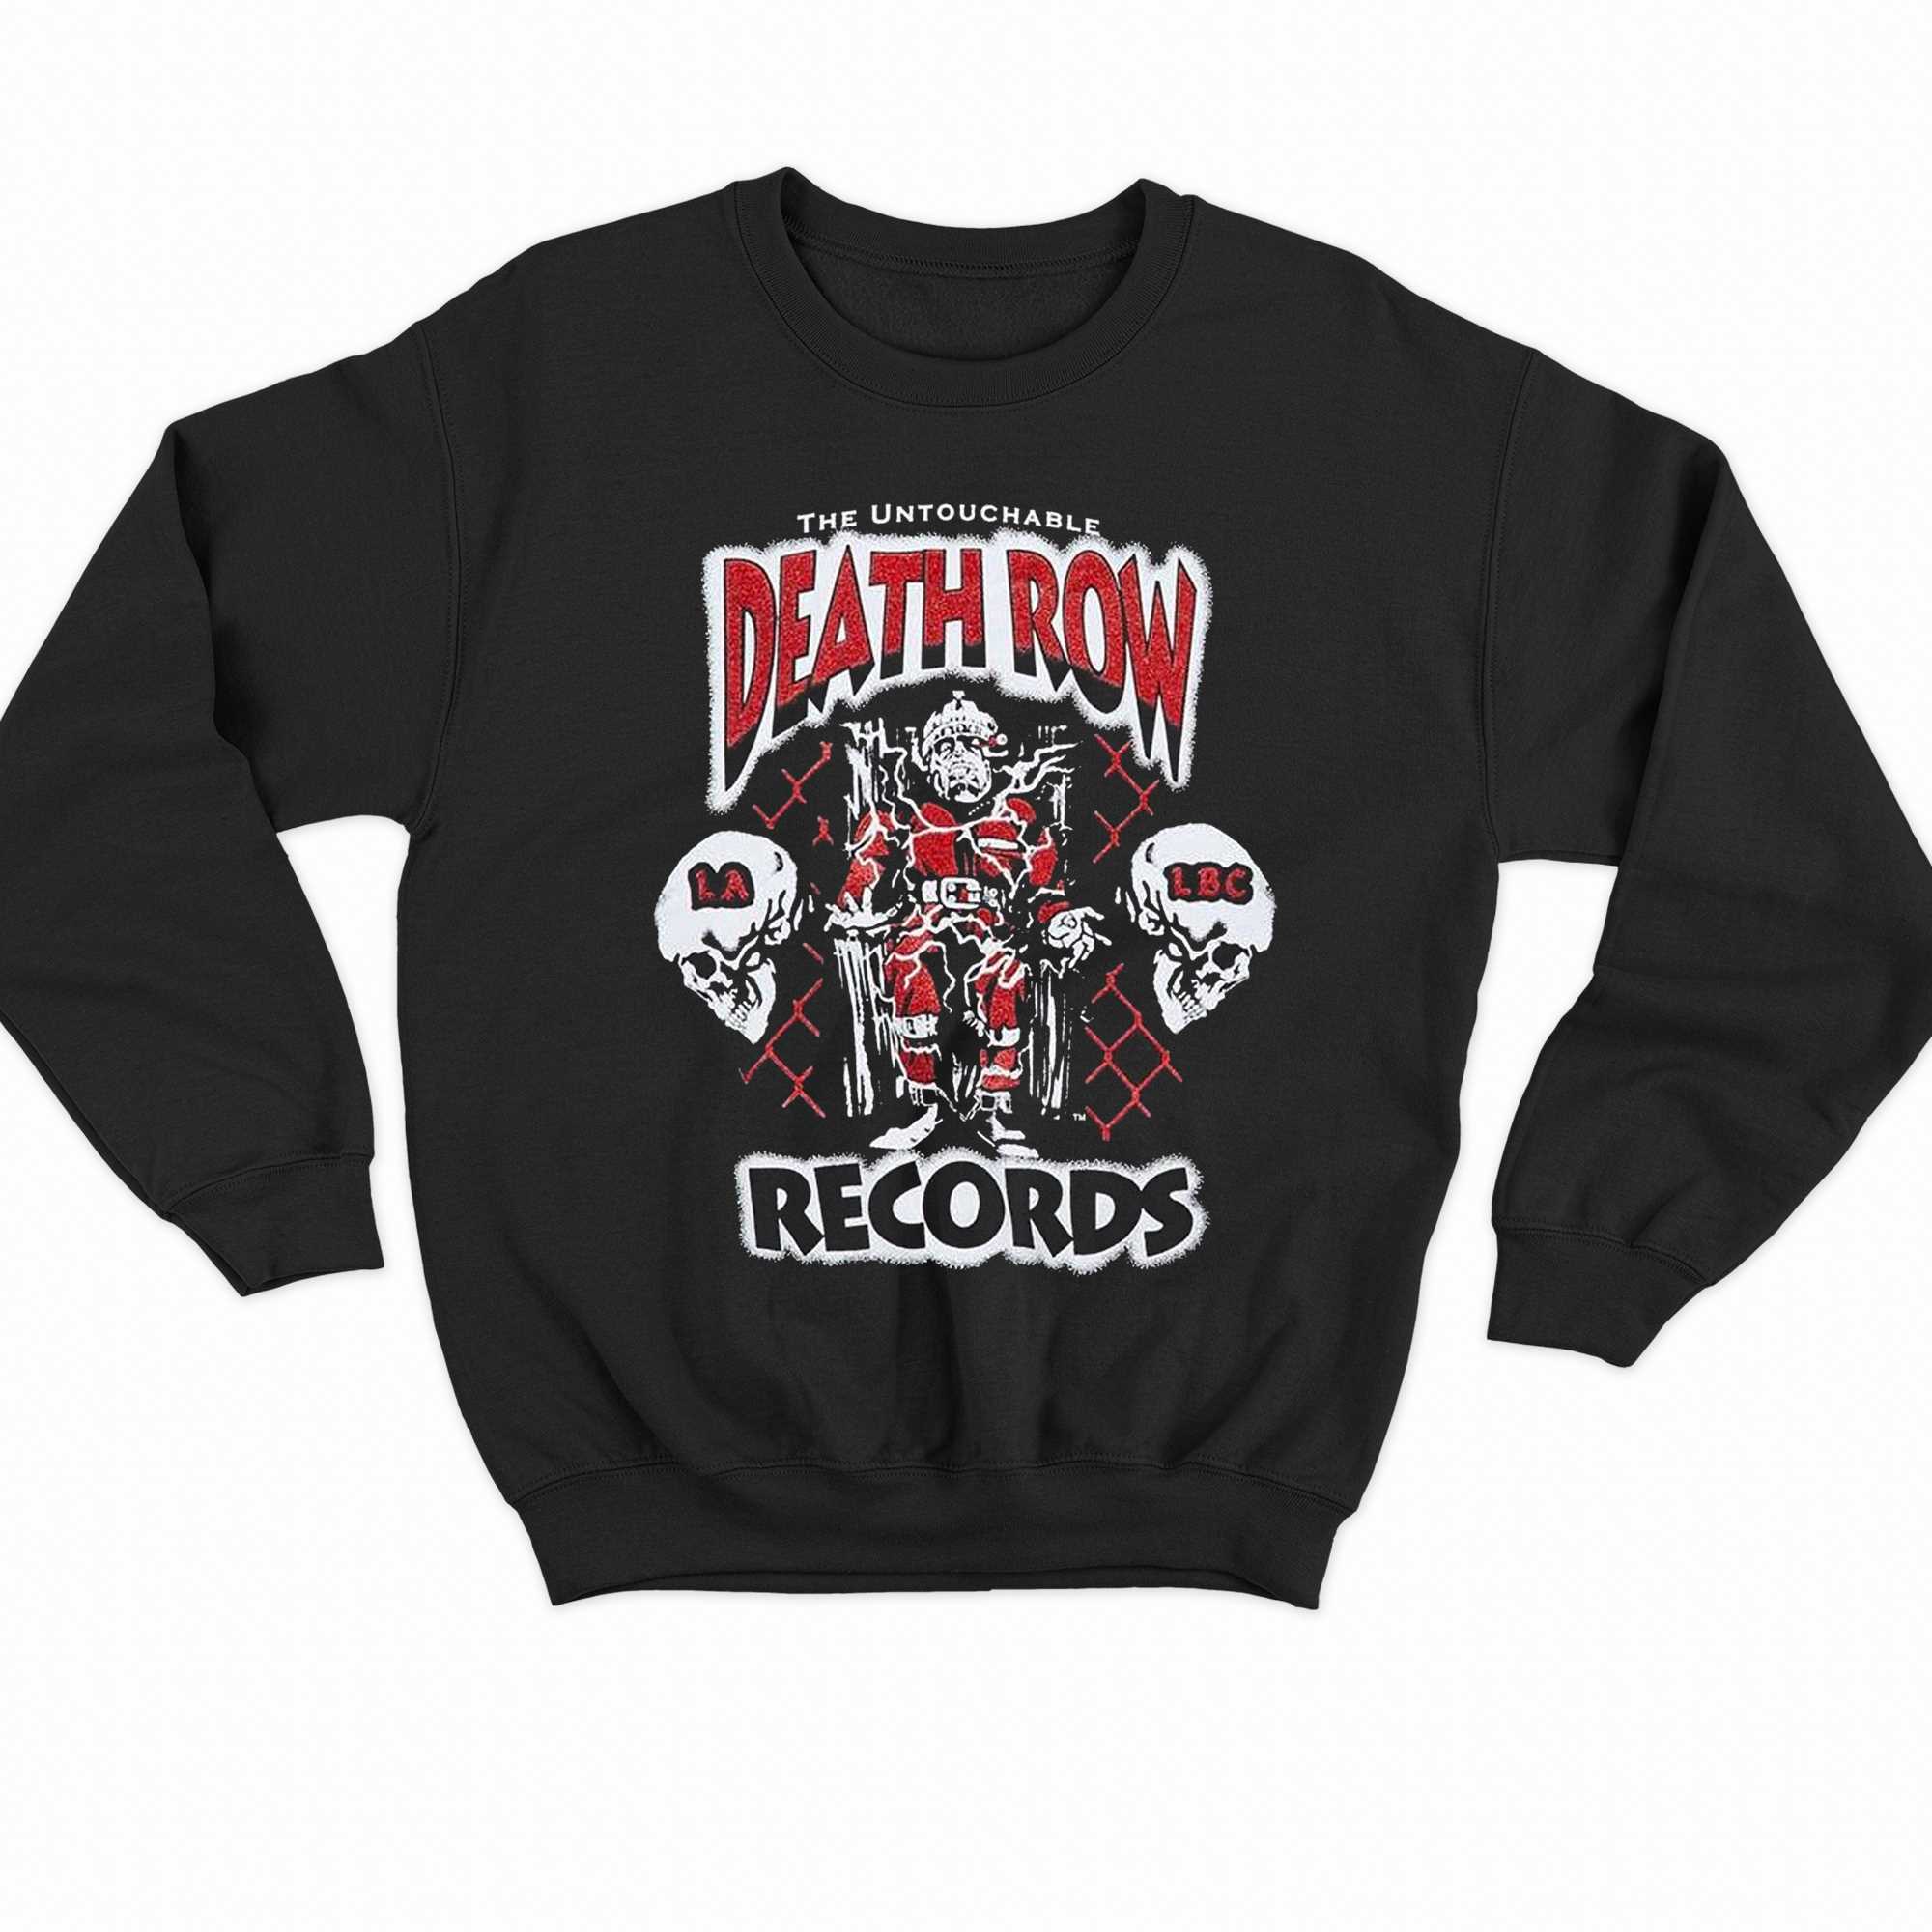 The Untouchable Death Row Records Shirt 